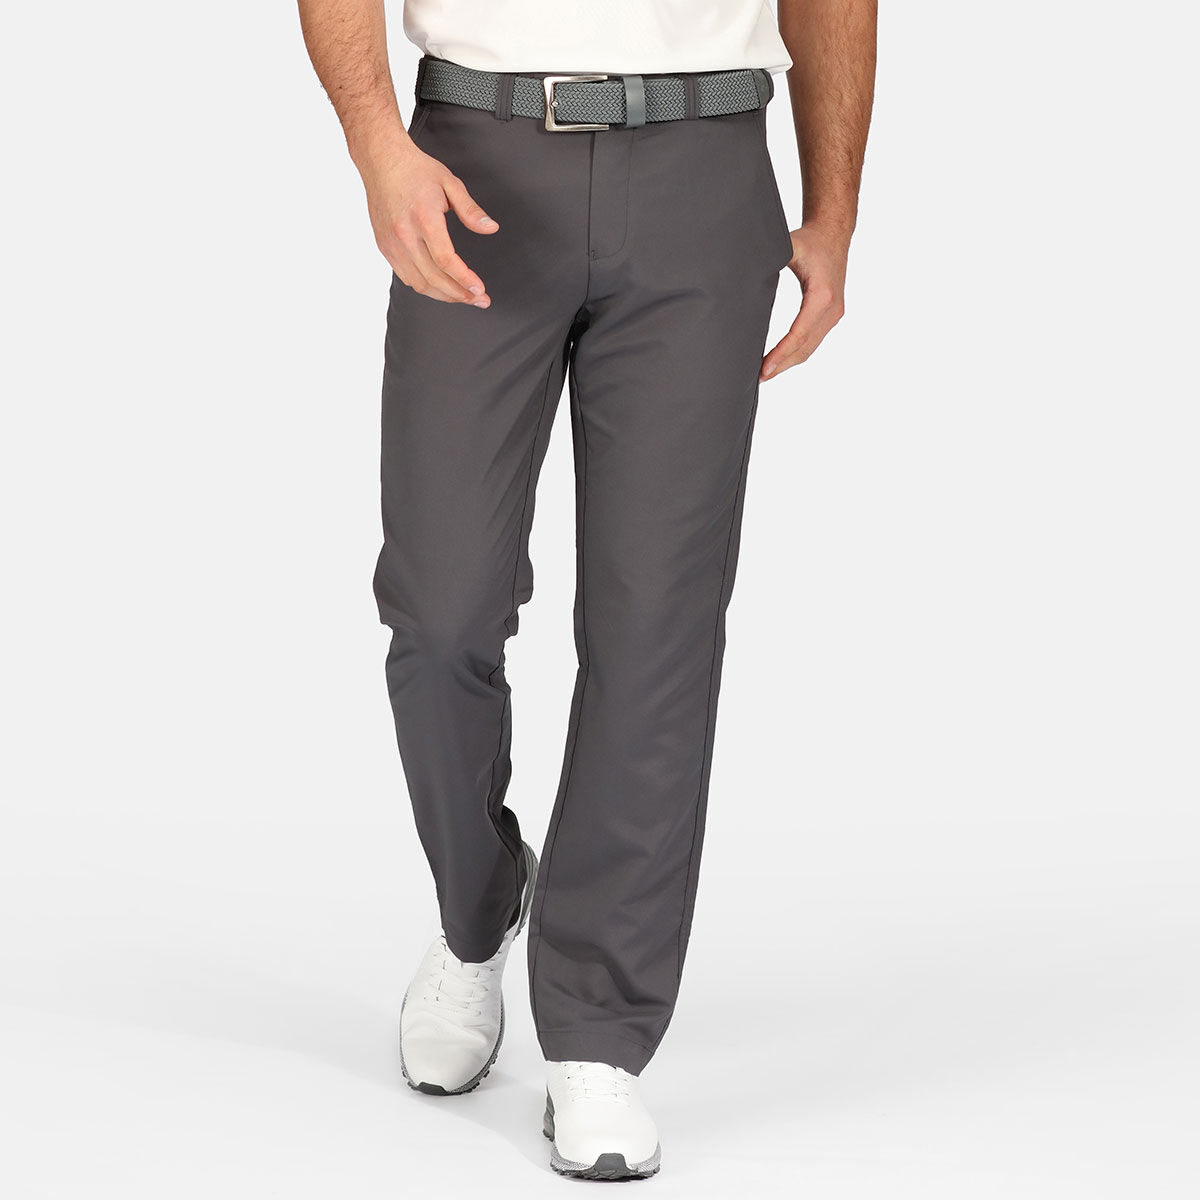 Stromberg Men's Weather Tech Stretch Golf Trousers, Mens, Grey, 38, Regular | American Golf - Father's Day Gift von Stromberg